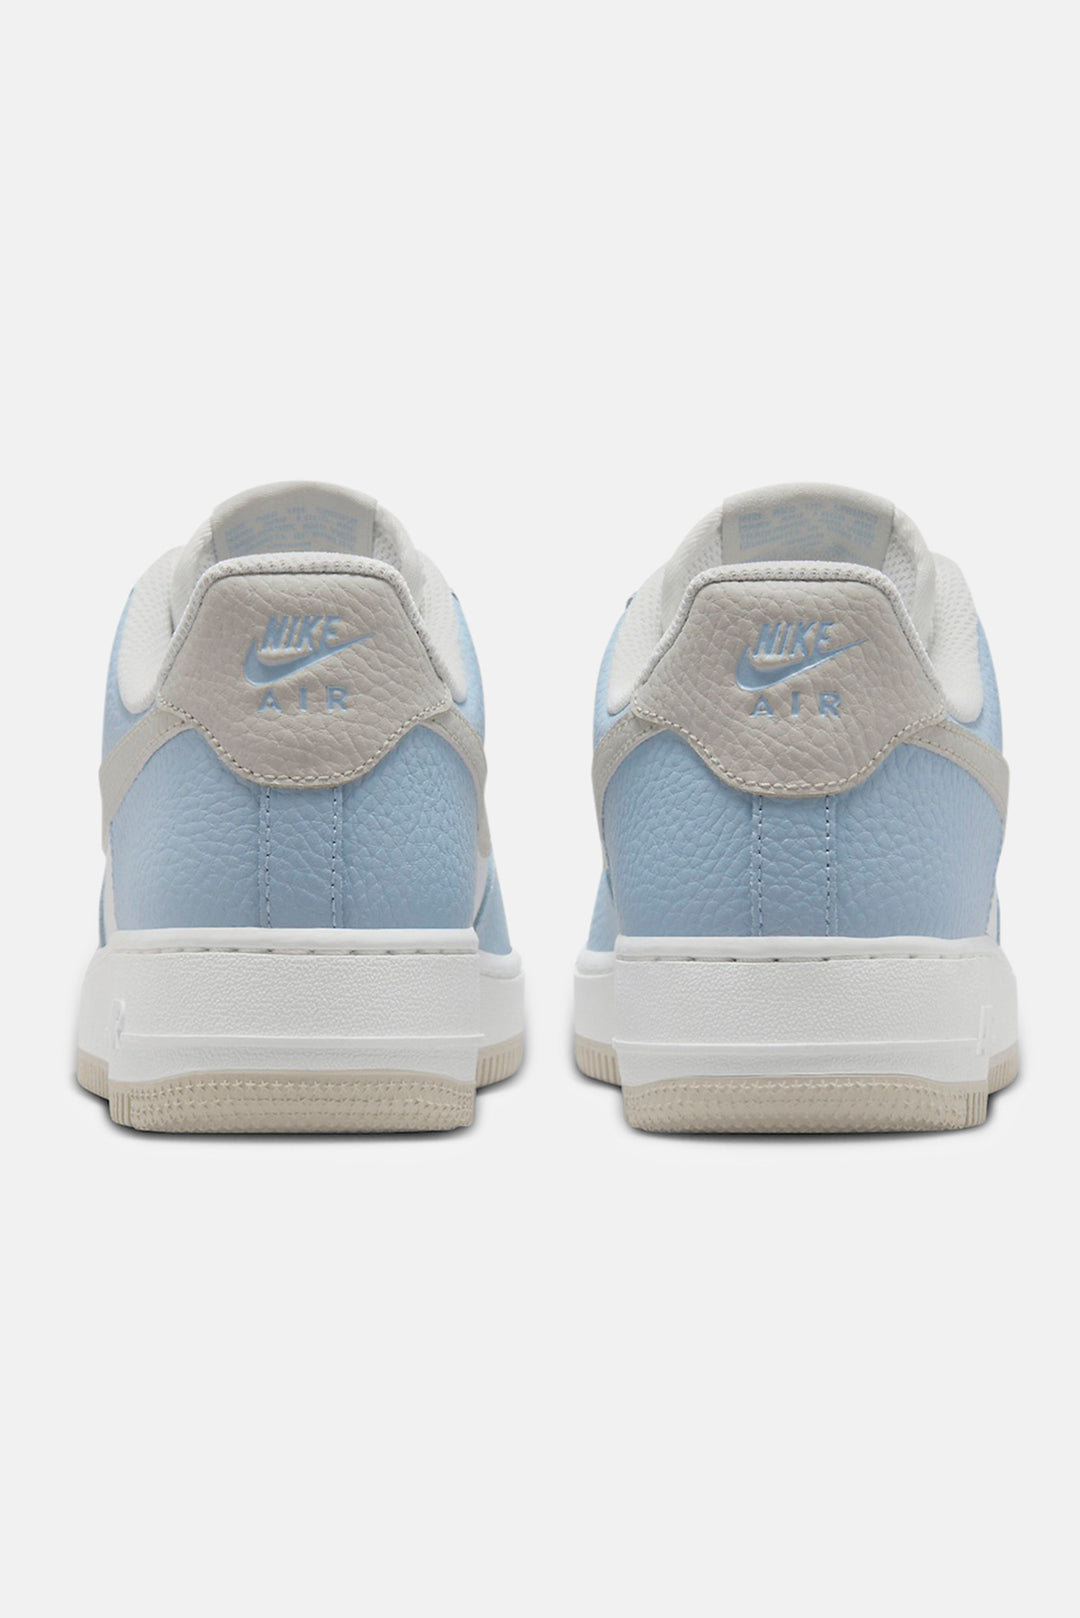 Women's Air Force 1 Low Light Armory Blue